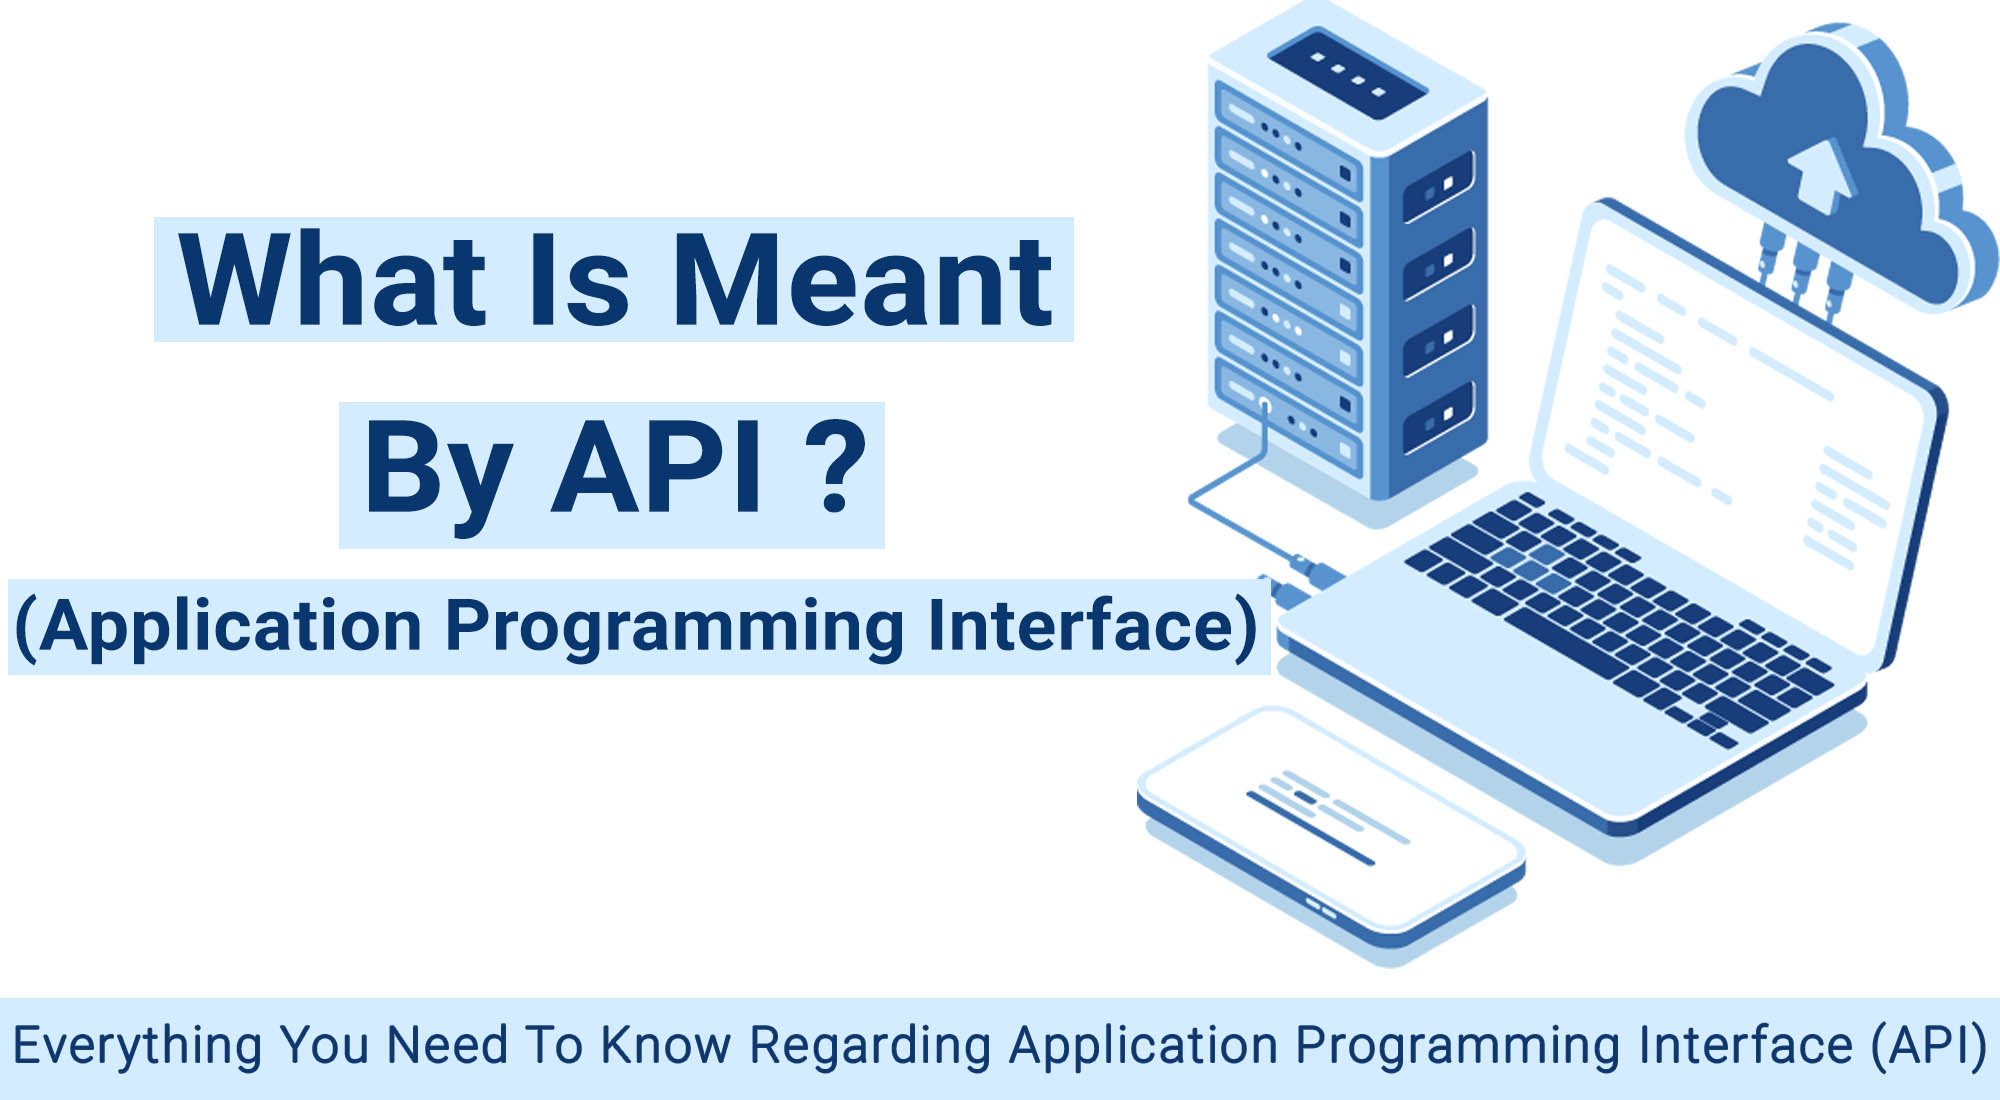 What is meant by API